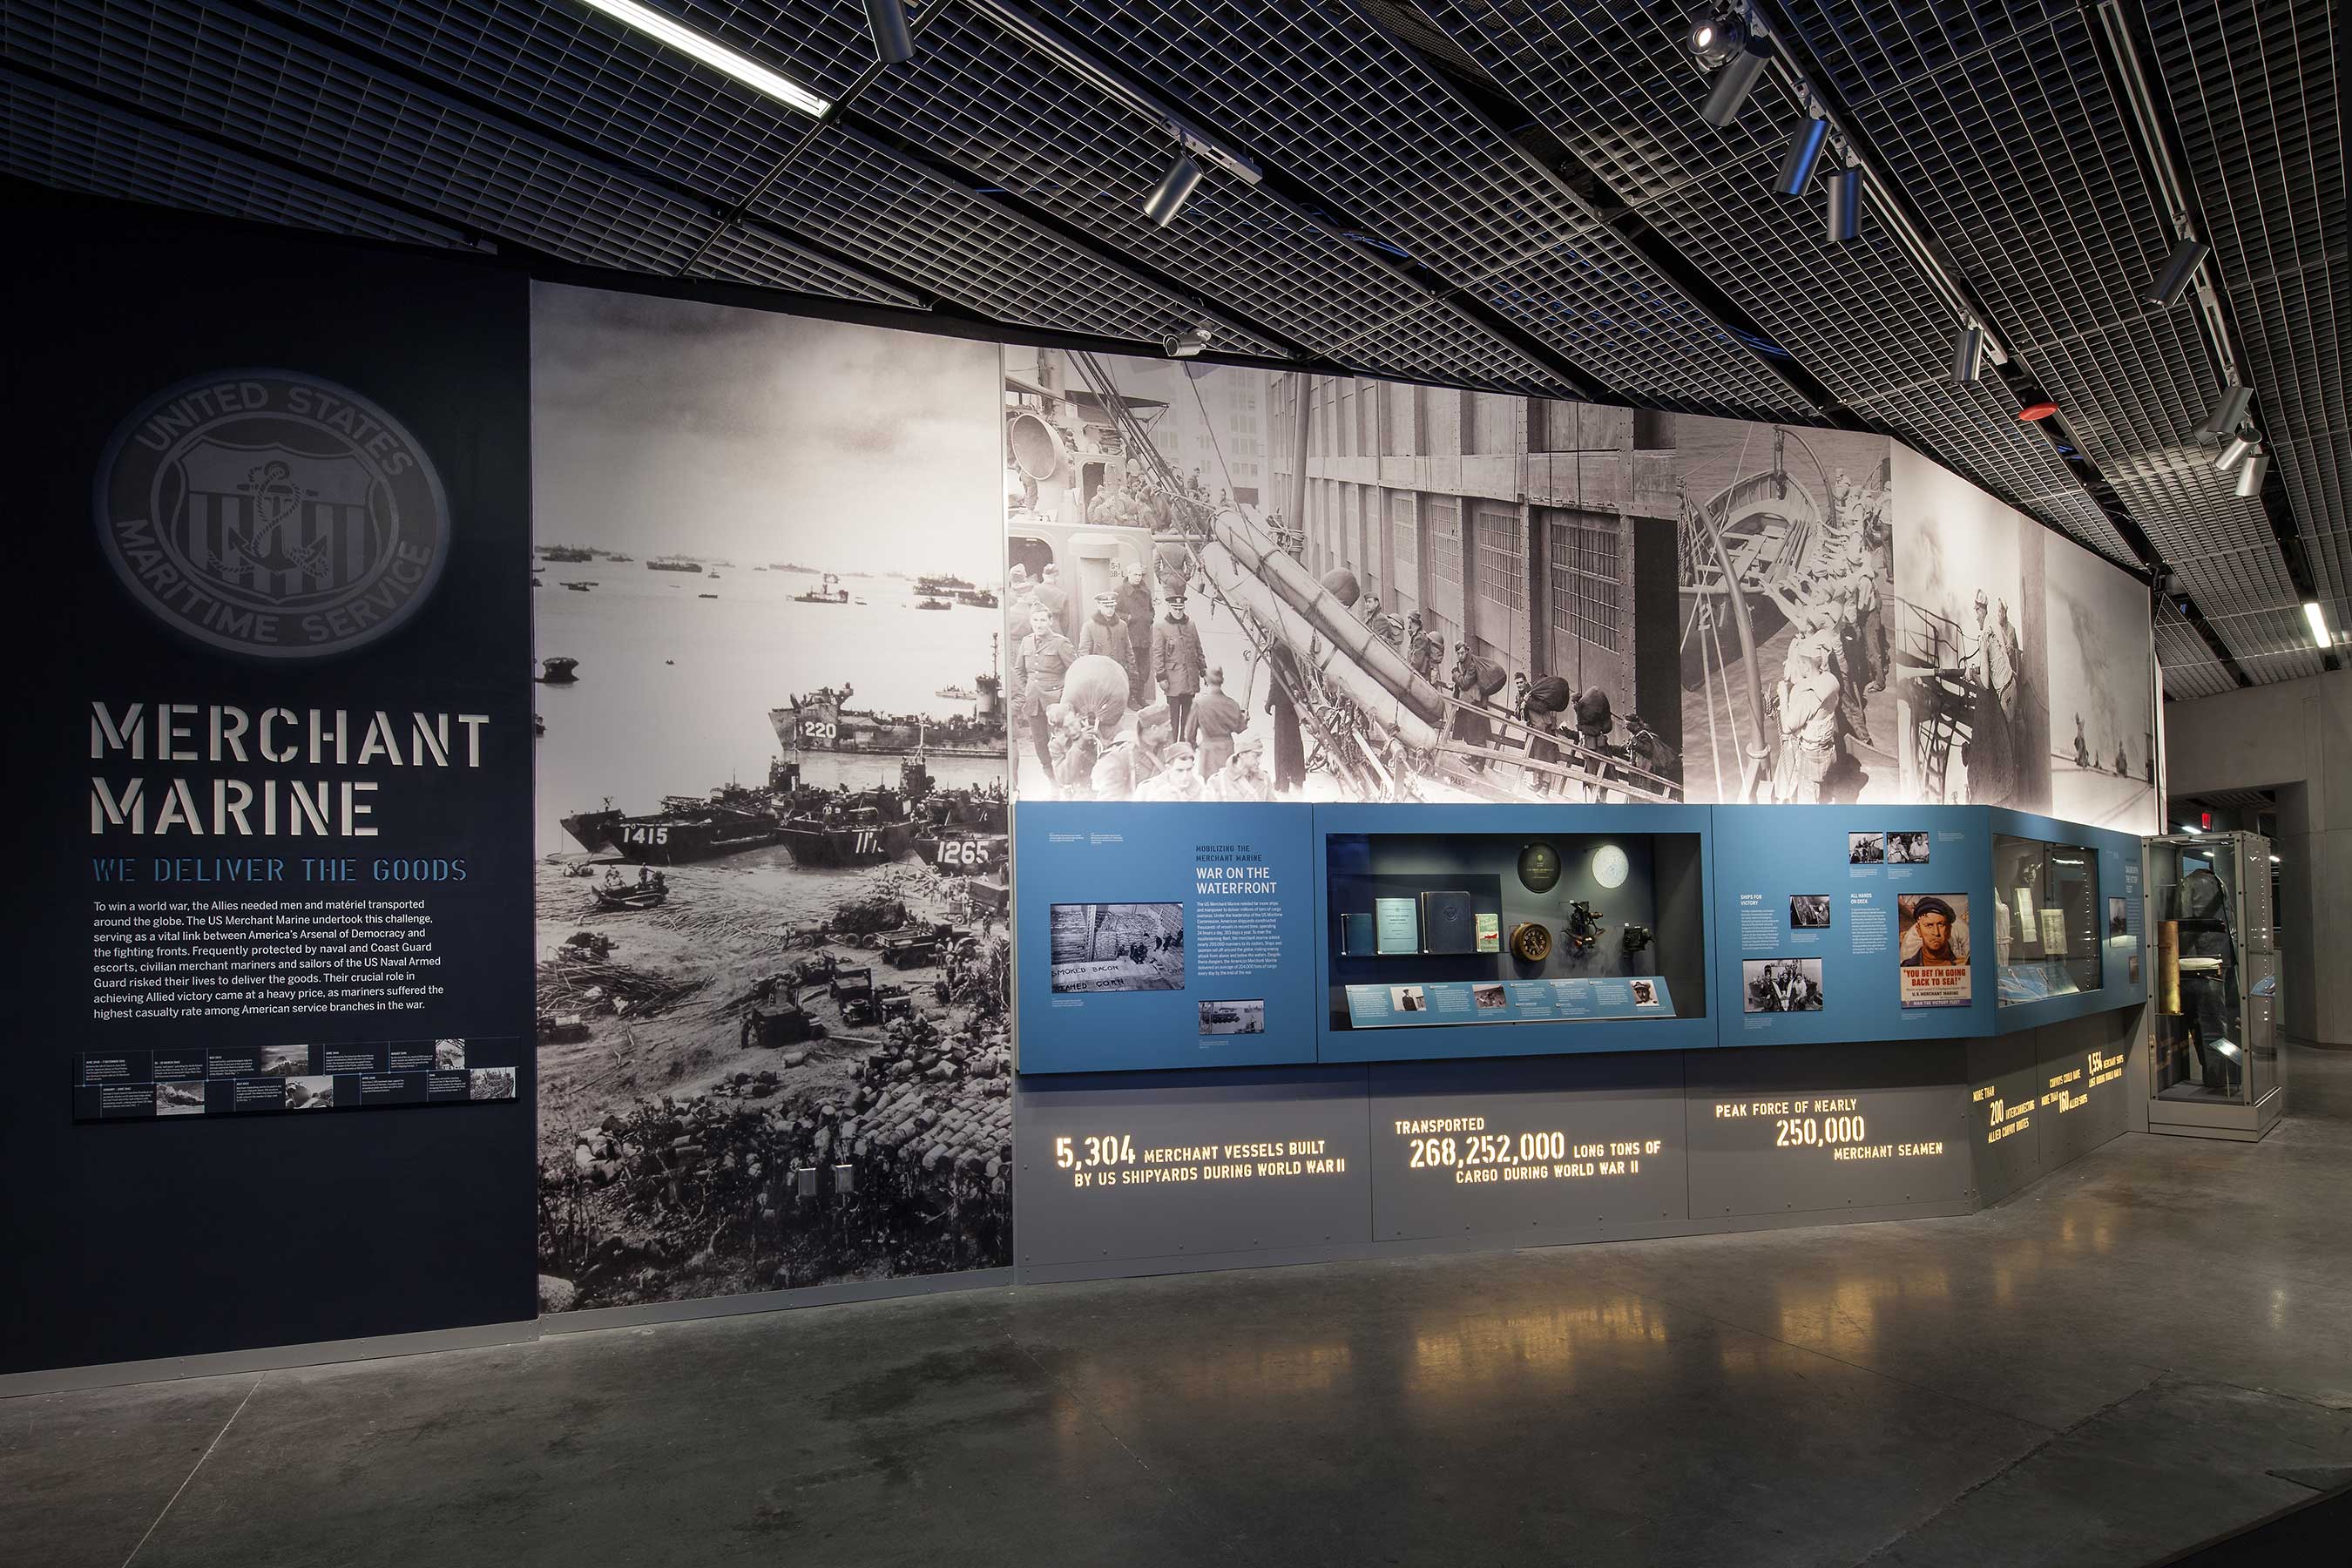 Situated at the end of the new American Spirit Bridge, on the second floor of the Solomon Victory Theater complex, this stand-alone 940-square-foot gallery honors the civilian merchant mariners who risked their lives transporting weapons, men, and matériel to US troops overseas.